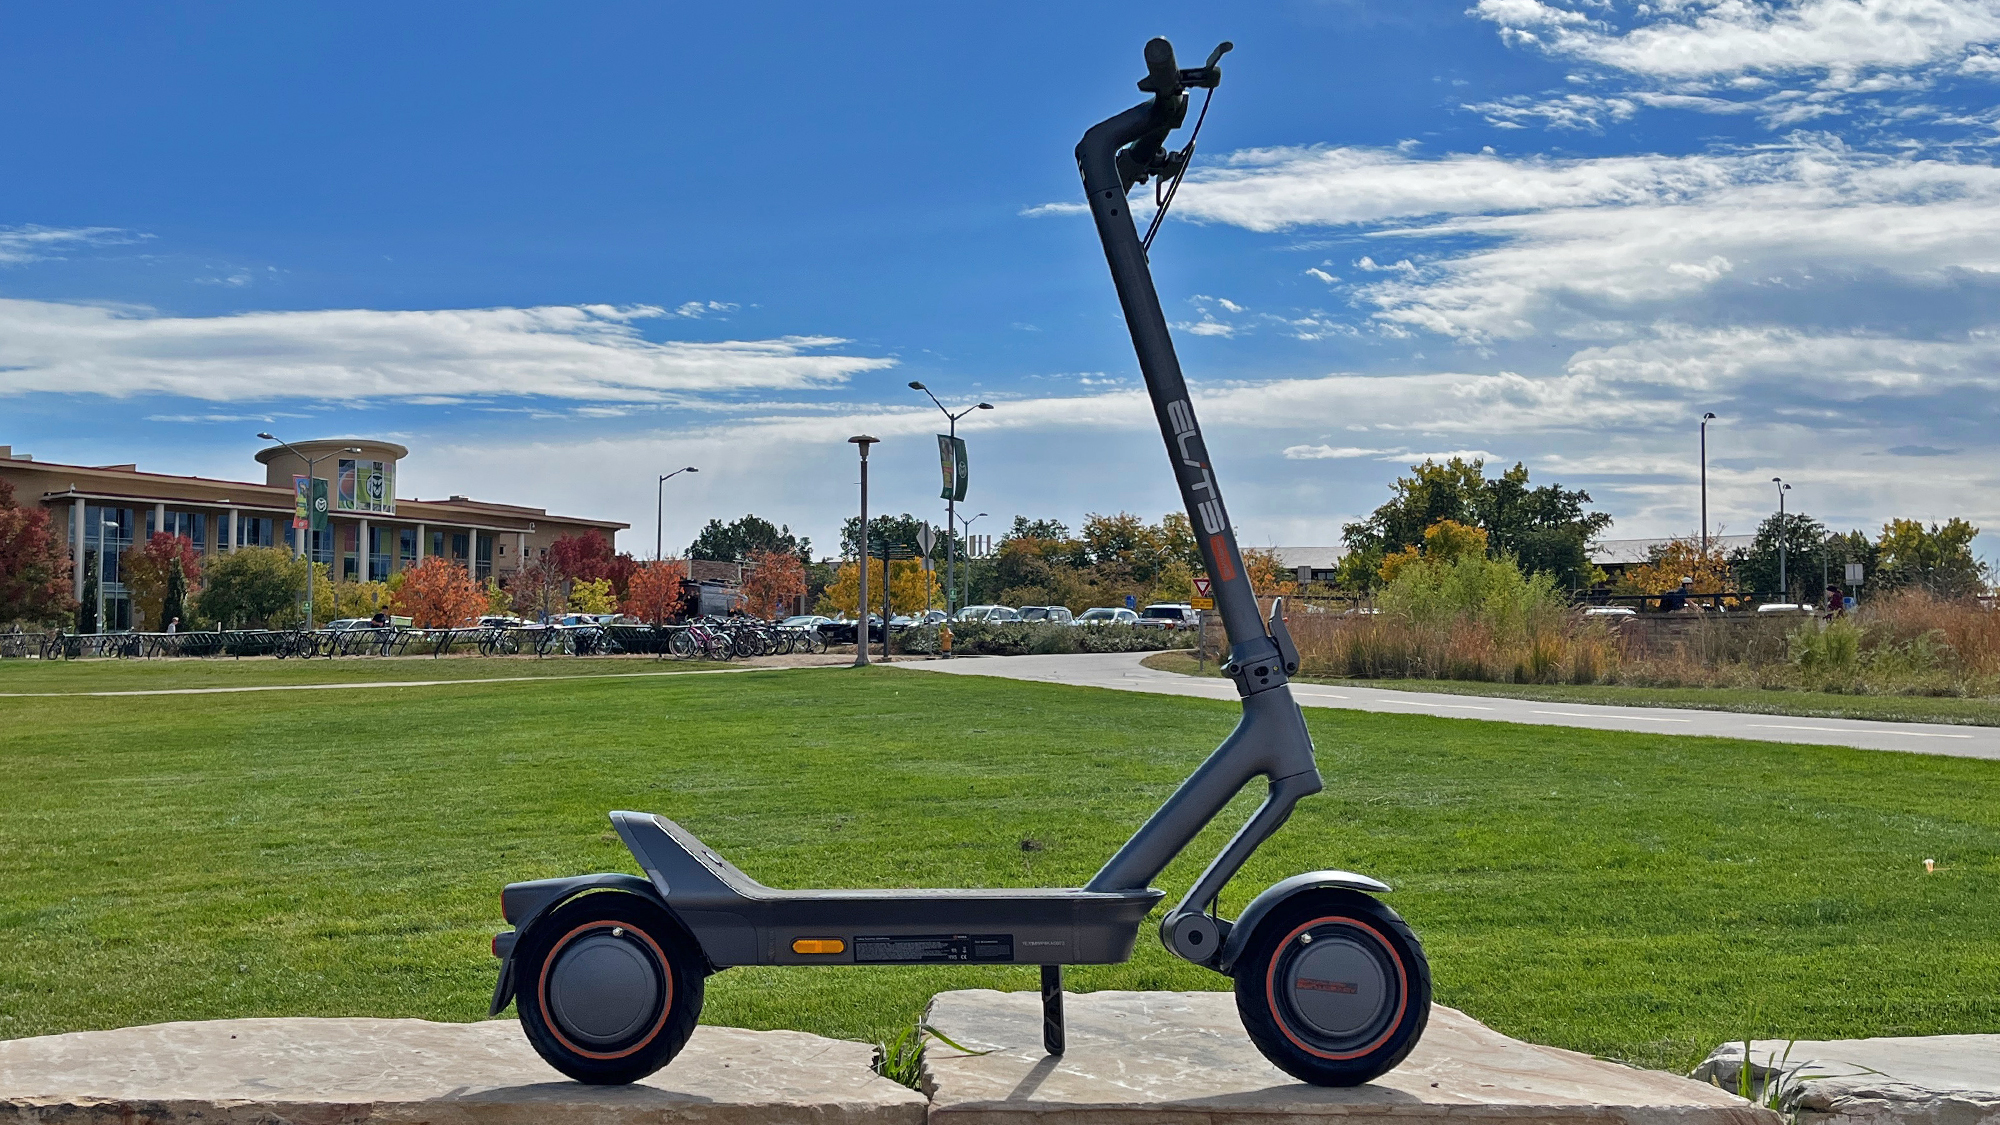 Yadea ElitePrime: Why it's the SUV of Electric Scooter's! : r